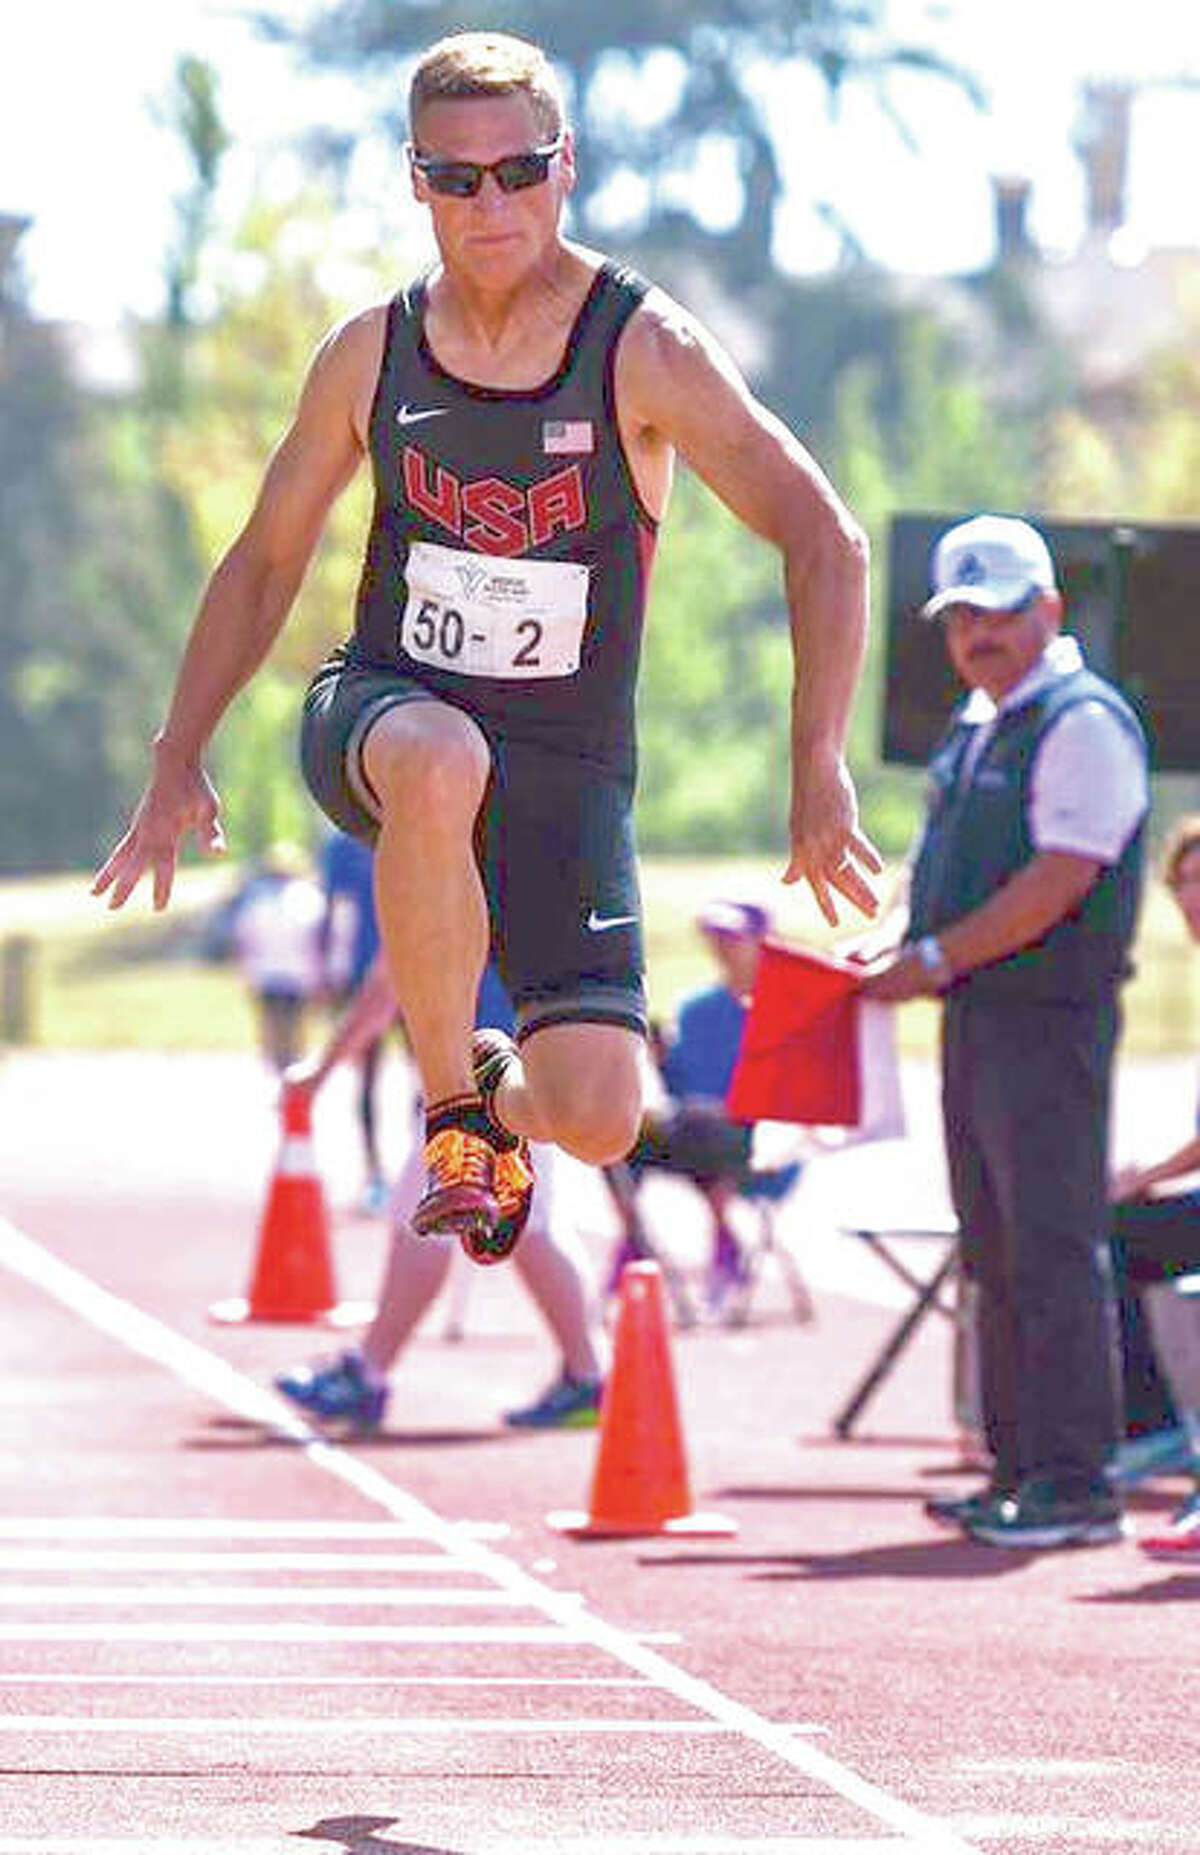 Mike Young, of Wood River, competing in a long jump during the U.S. Senior Games in Birmingham, Alabama. He is a Senior Olympian and state record holder.